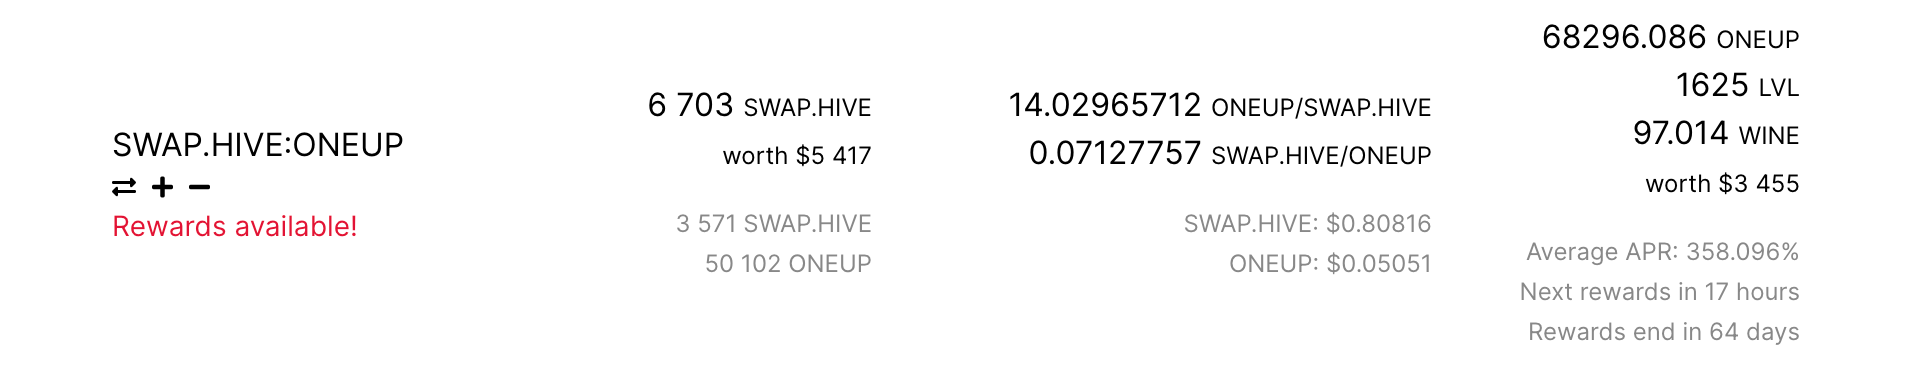 The SWAP.HIVE:ONEUP LP has a massive APR on offer, but risks remain.